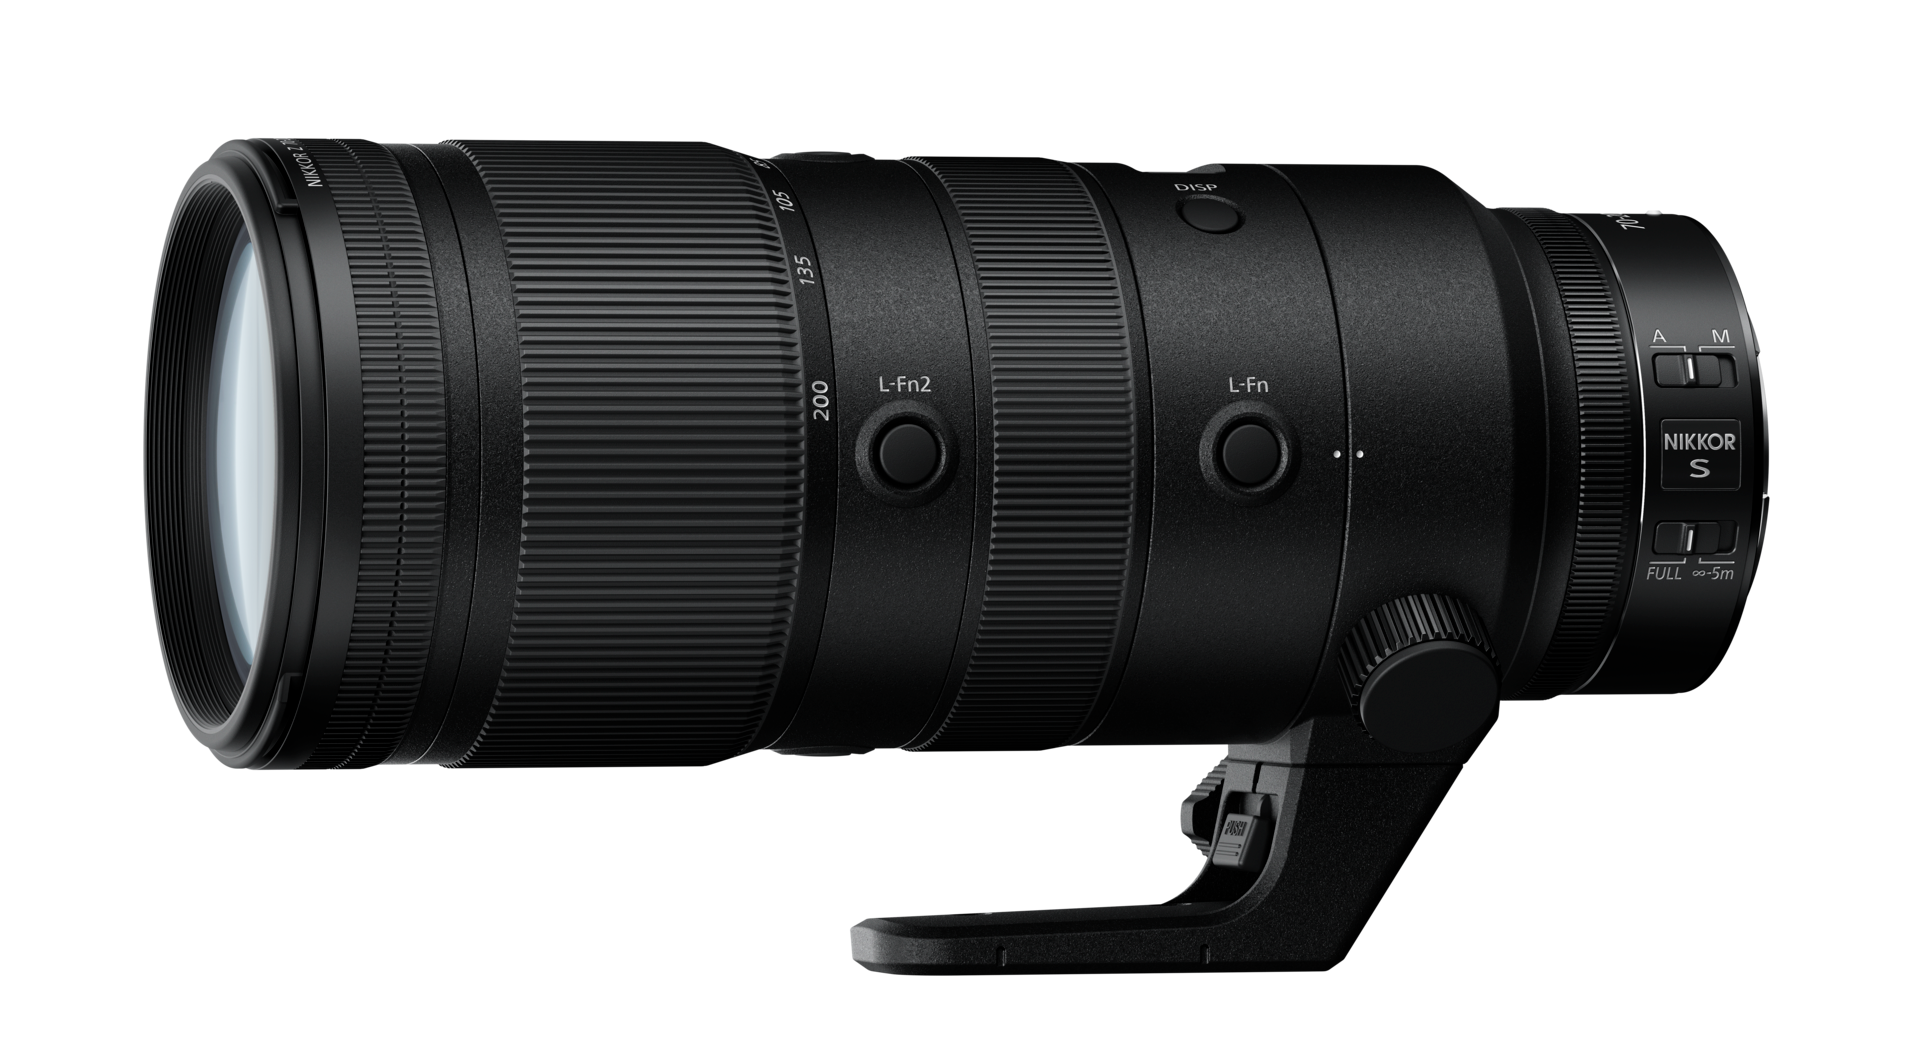 Product Image of Nikon 70-200mm f2.8 VR S Lens Z series